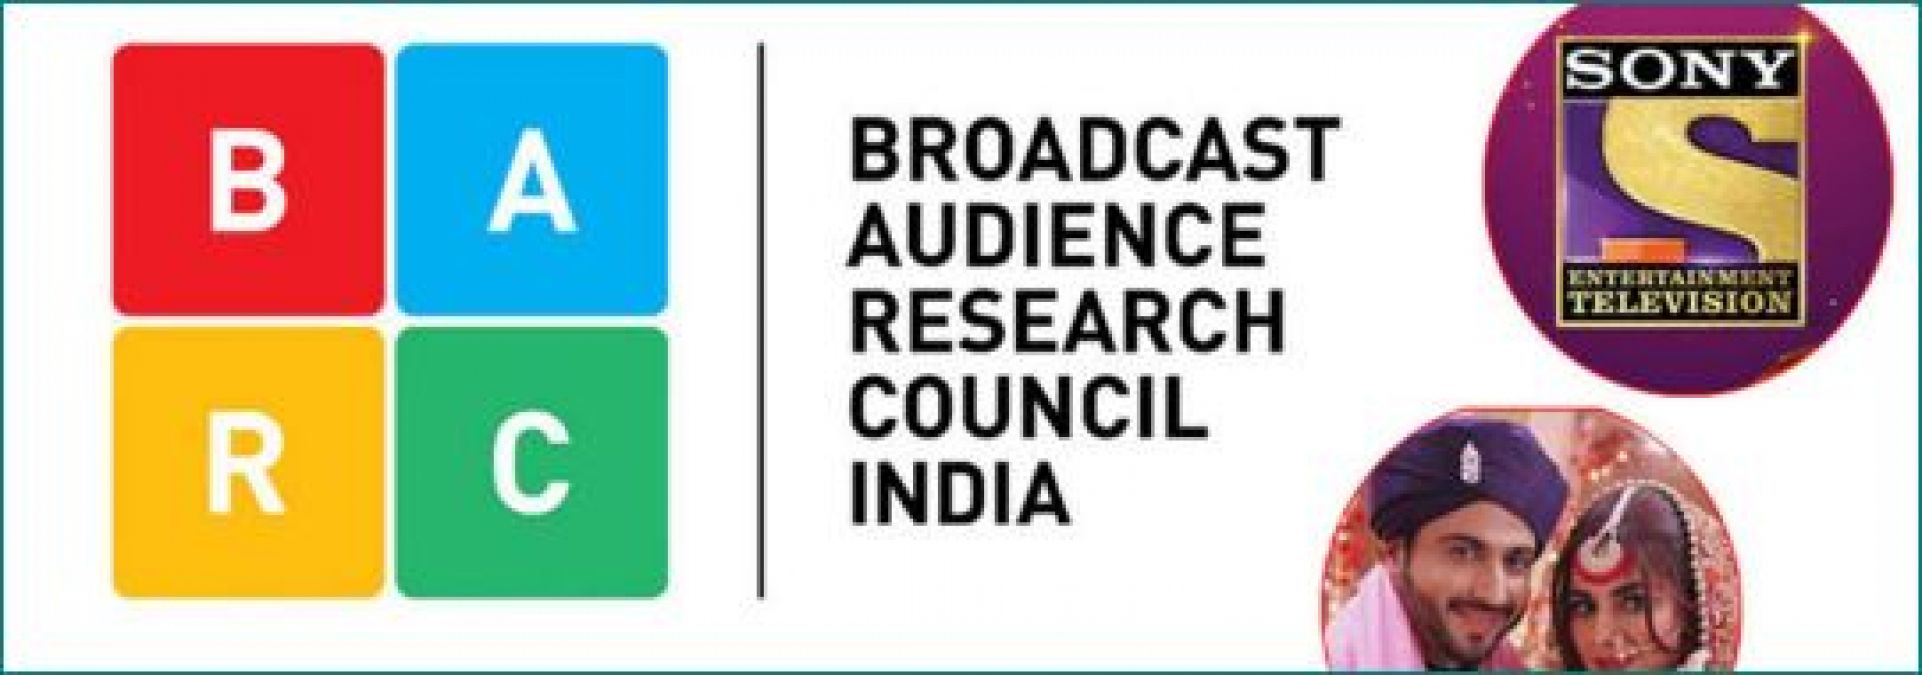 BARC takes big decision, ban on television ratings for next 12 weeks